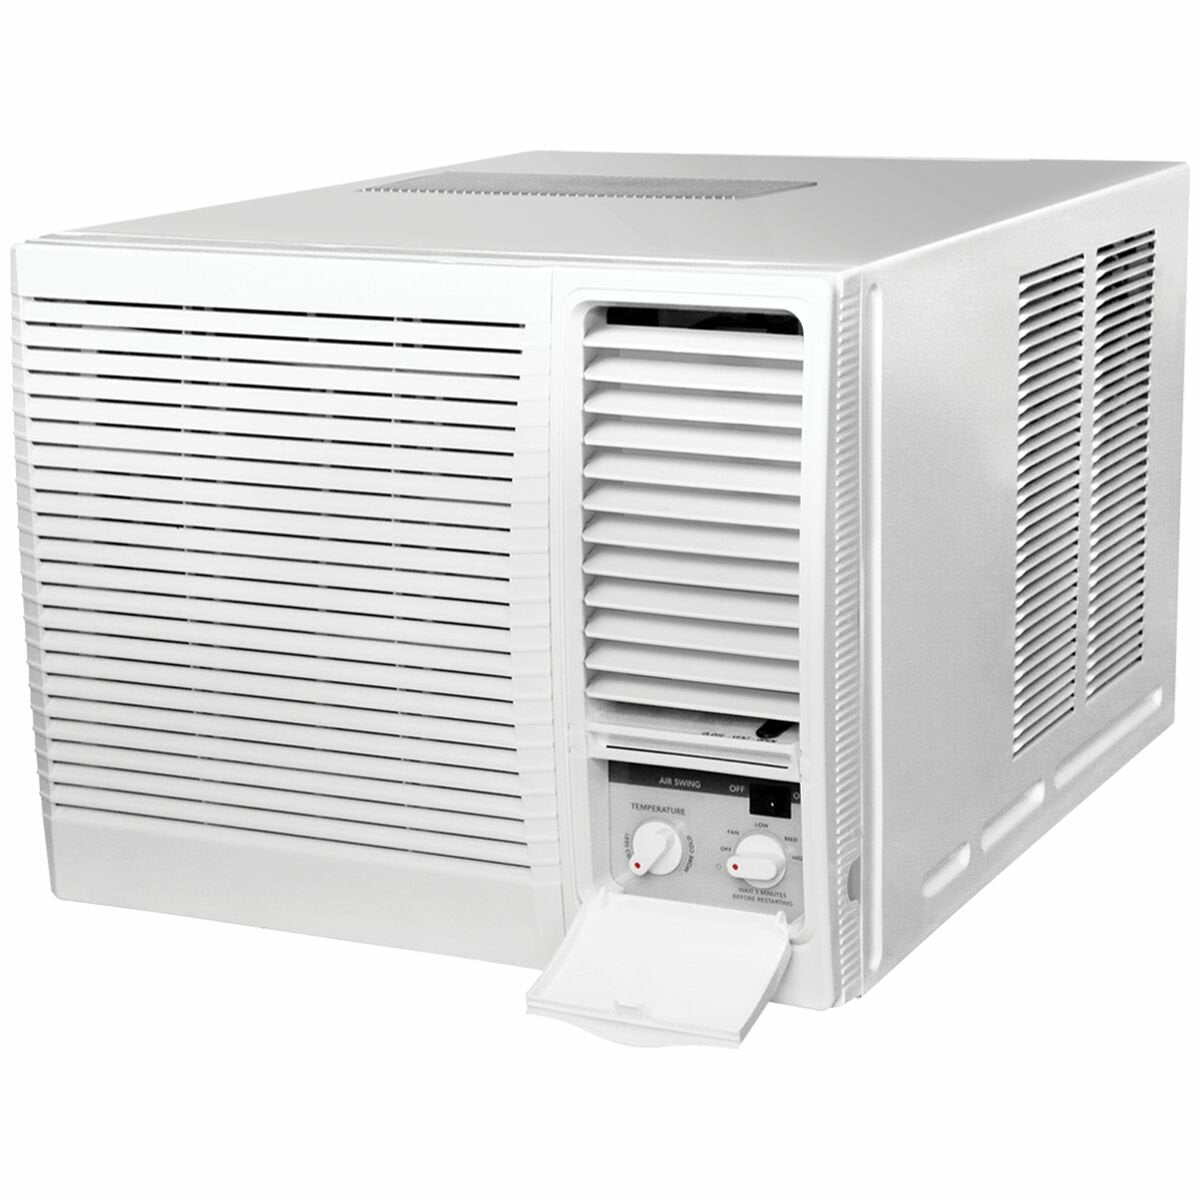 Kelvinator 1.6 kW Window-Wall Cooling Only Air Conditioner - Brisbane Home Appliances